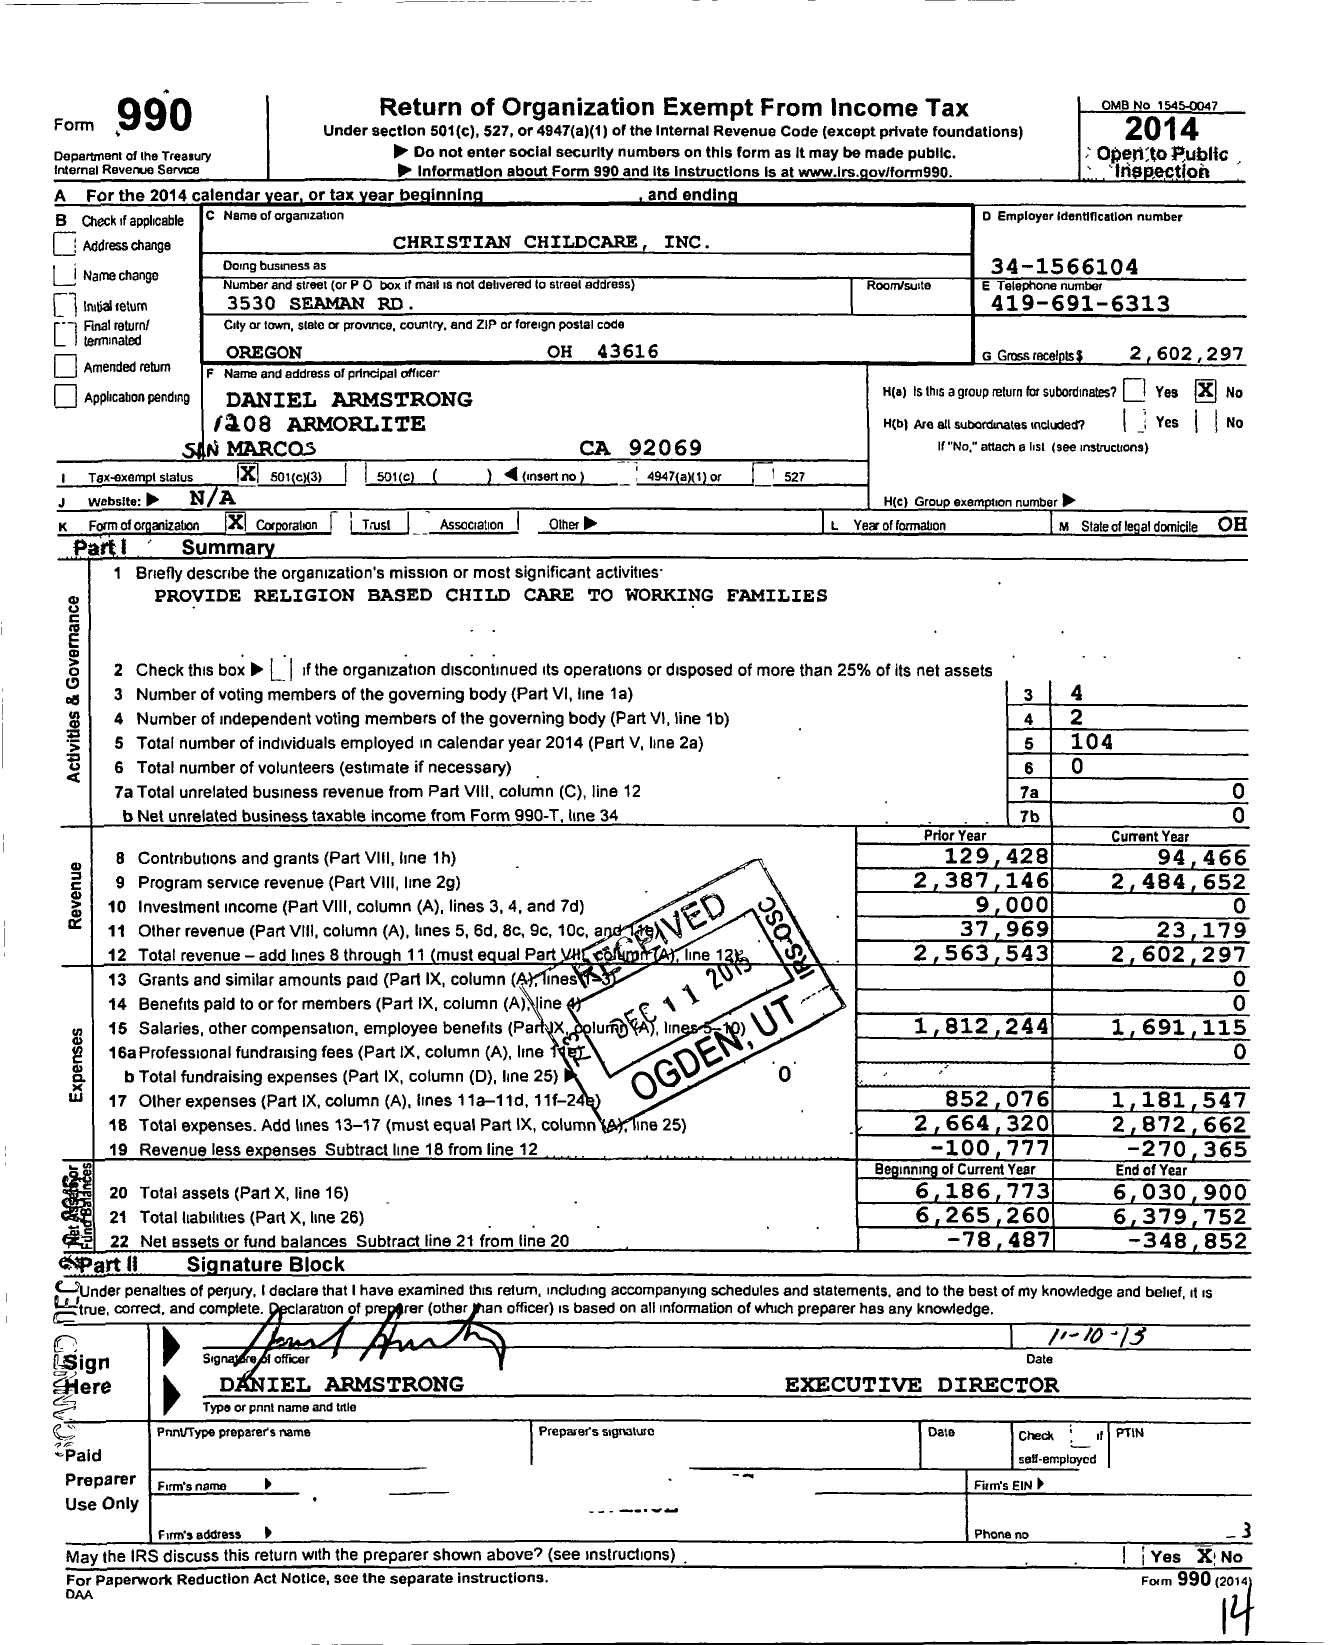 Image of first page of 2014 Form 990 for Christian Childcare